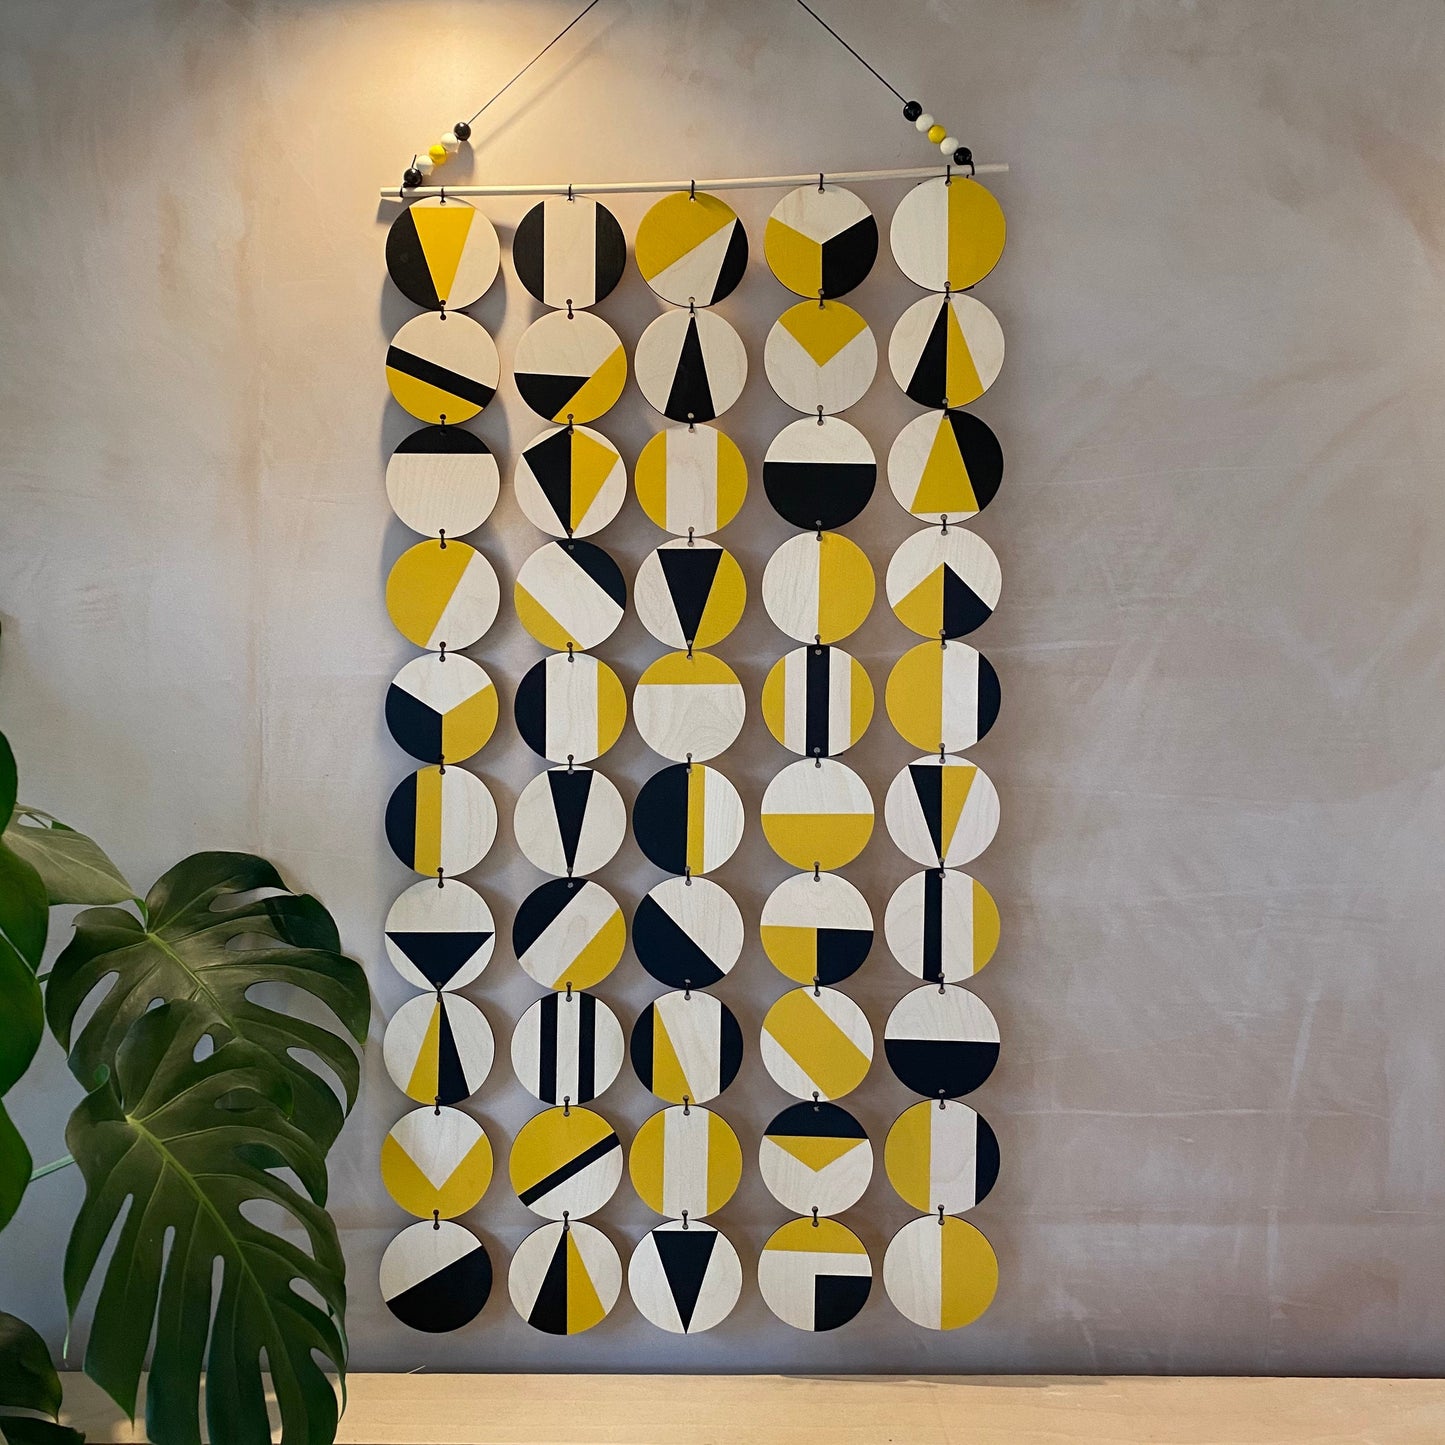 Black and Yellow Wall Art - Large Decoration - Huge Geometric Art - Contemporary Wall Decoration - Home Wall Decor - Wall Tapestry